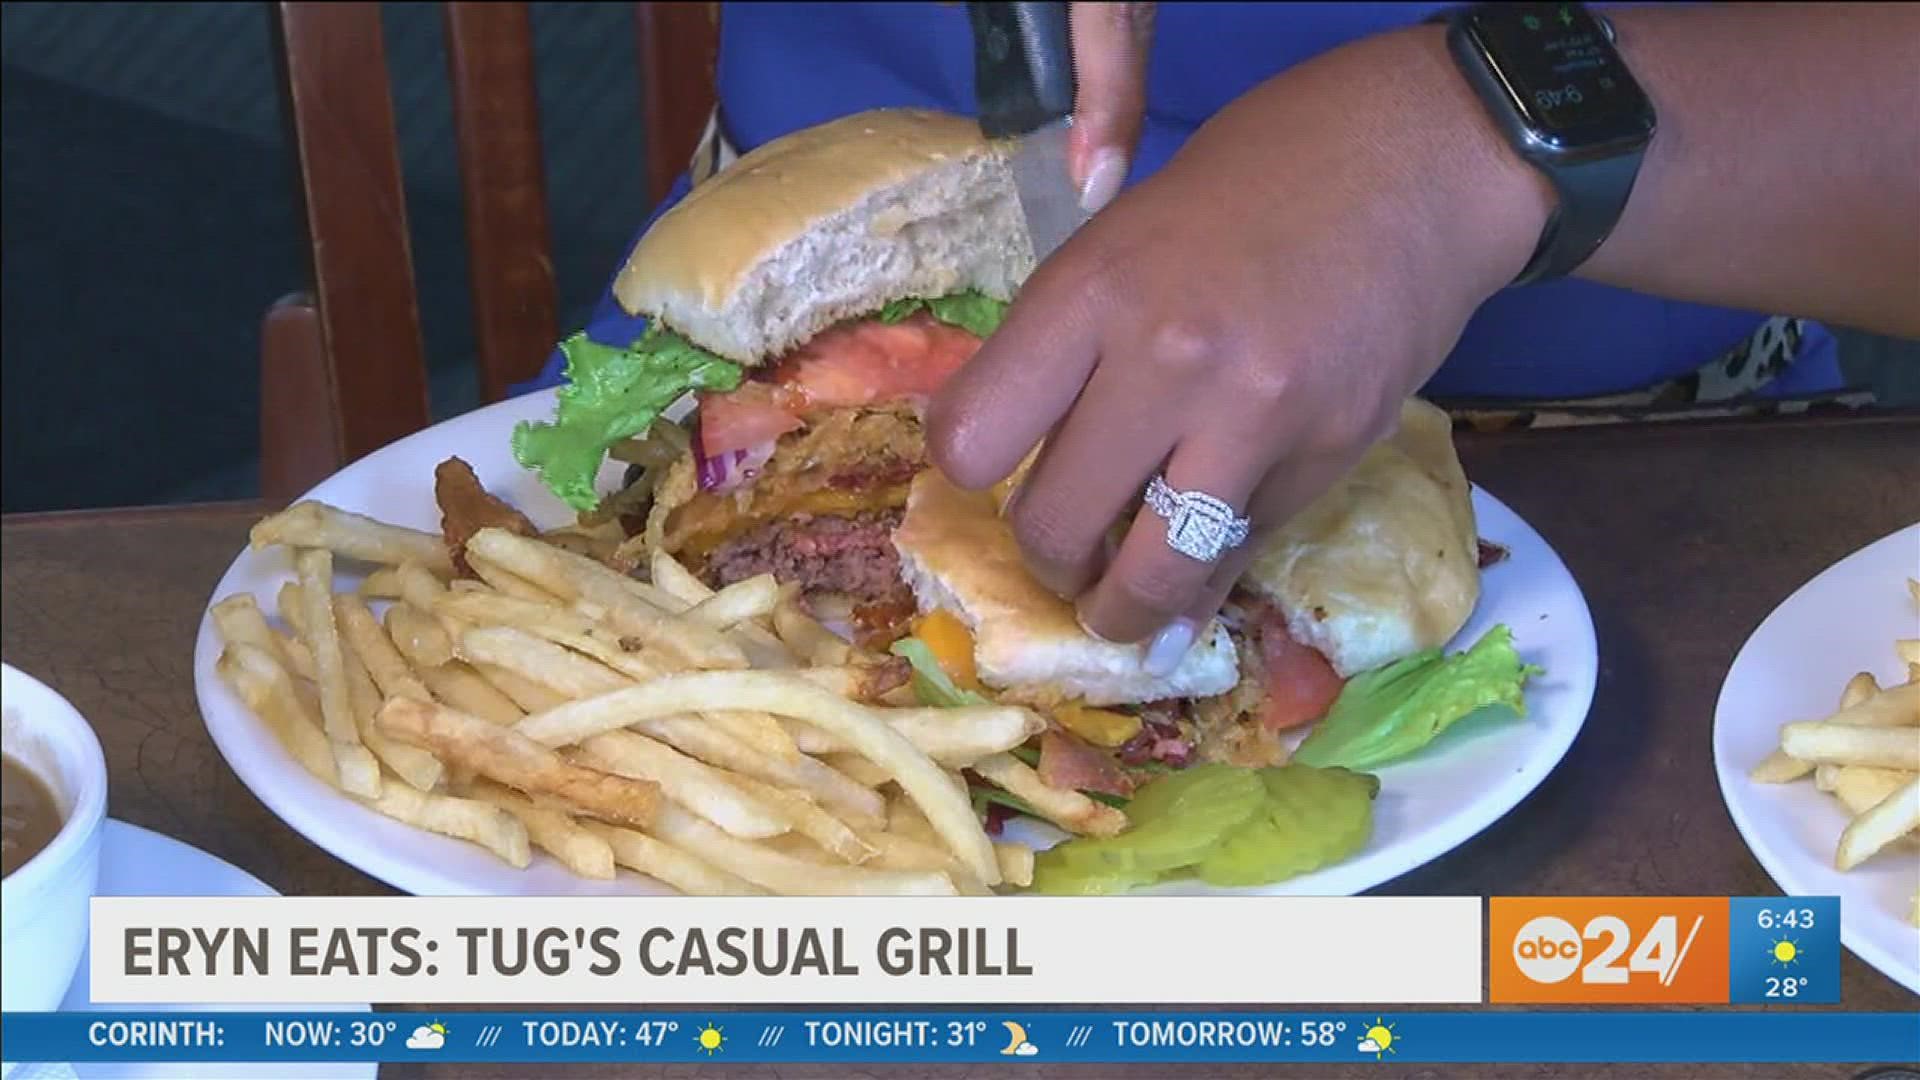 Anchor Eryn Rogers introduces us to Tug's Casual Grill in Harbor Town where they put a spin on Southern comfort foods.